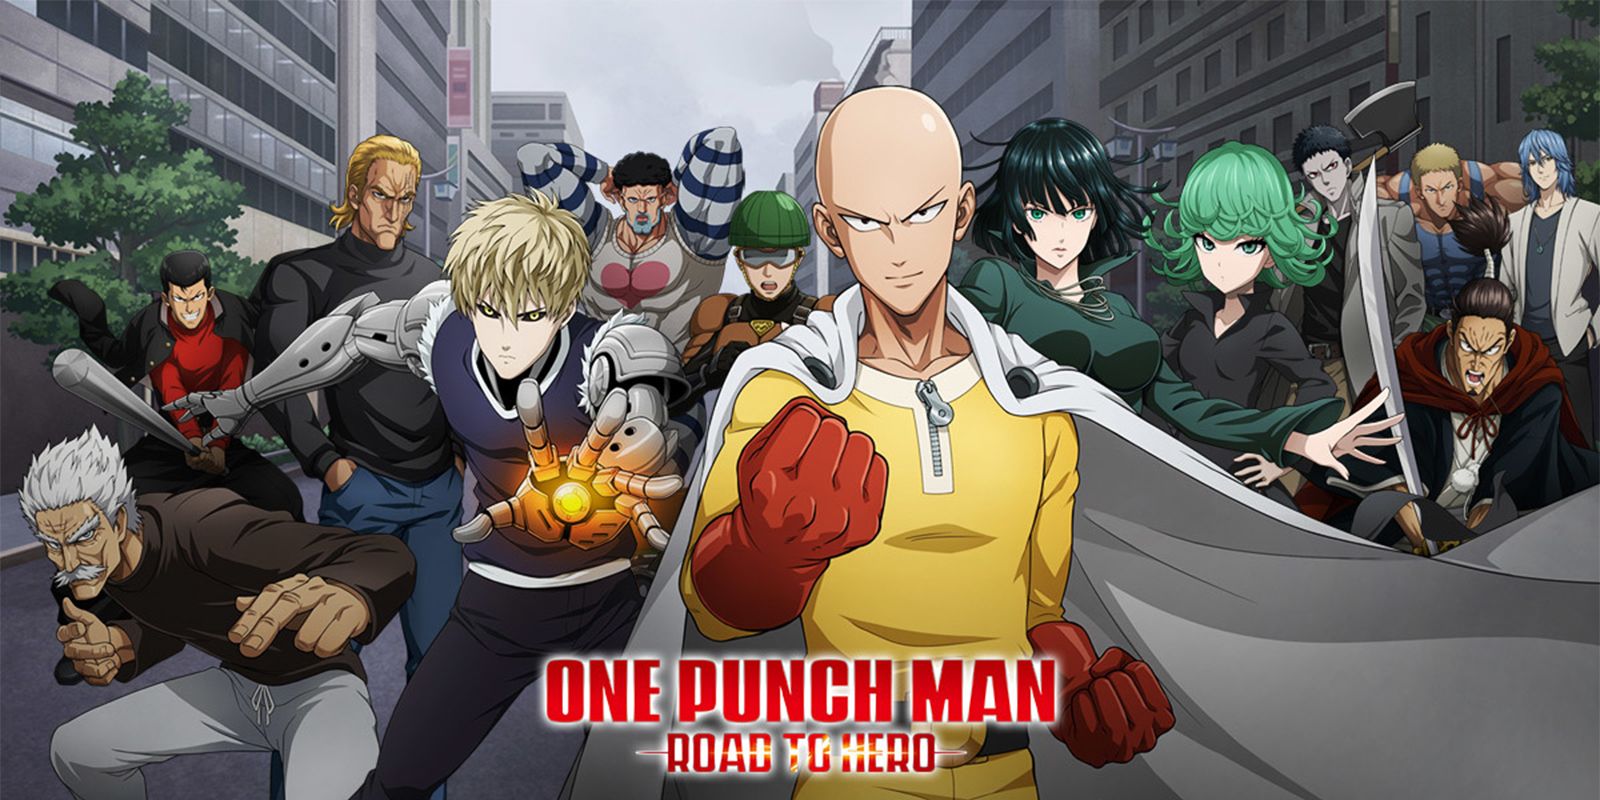 OnePunch Man Road to Hero Launches Today